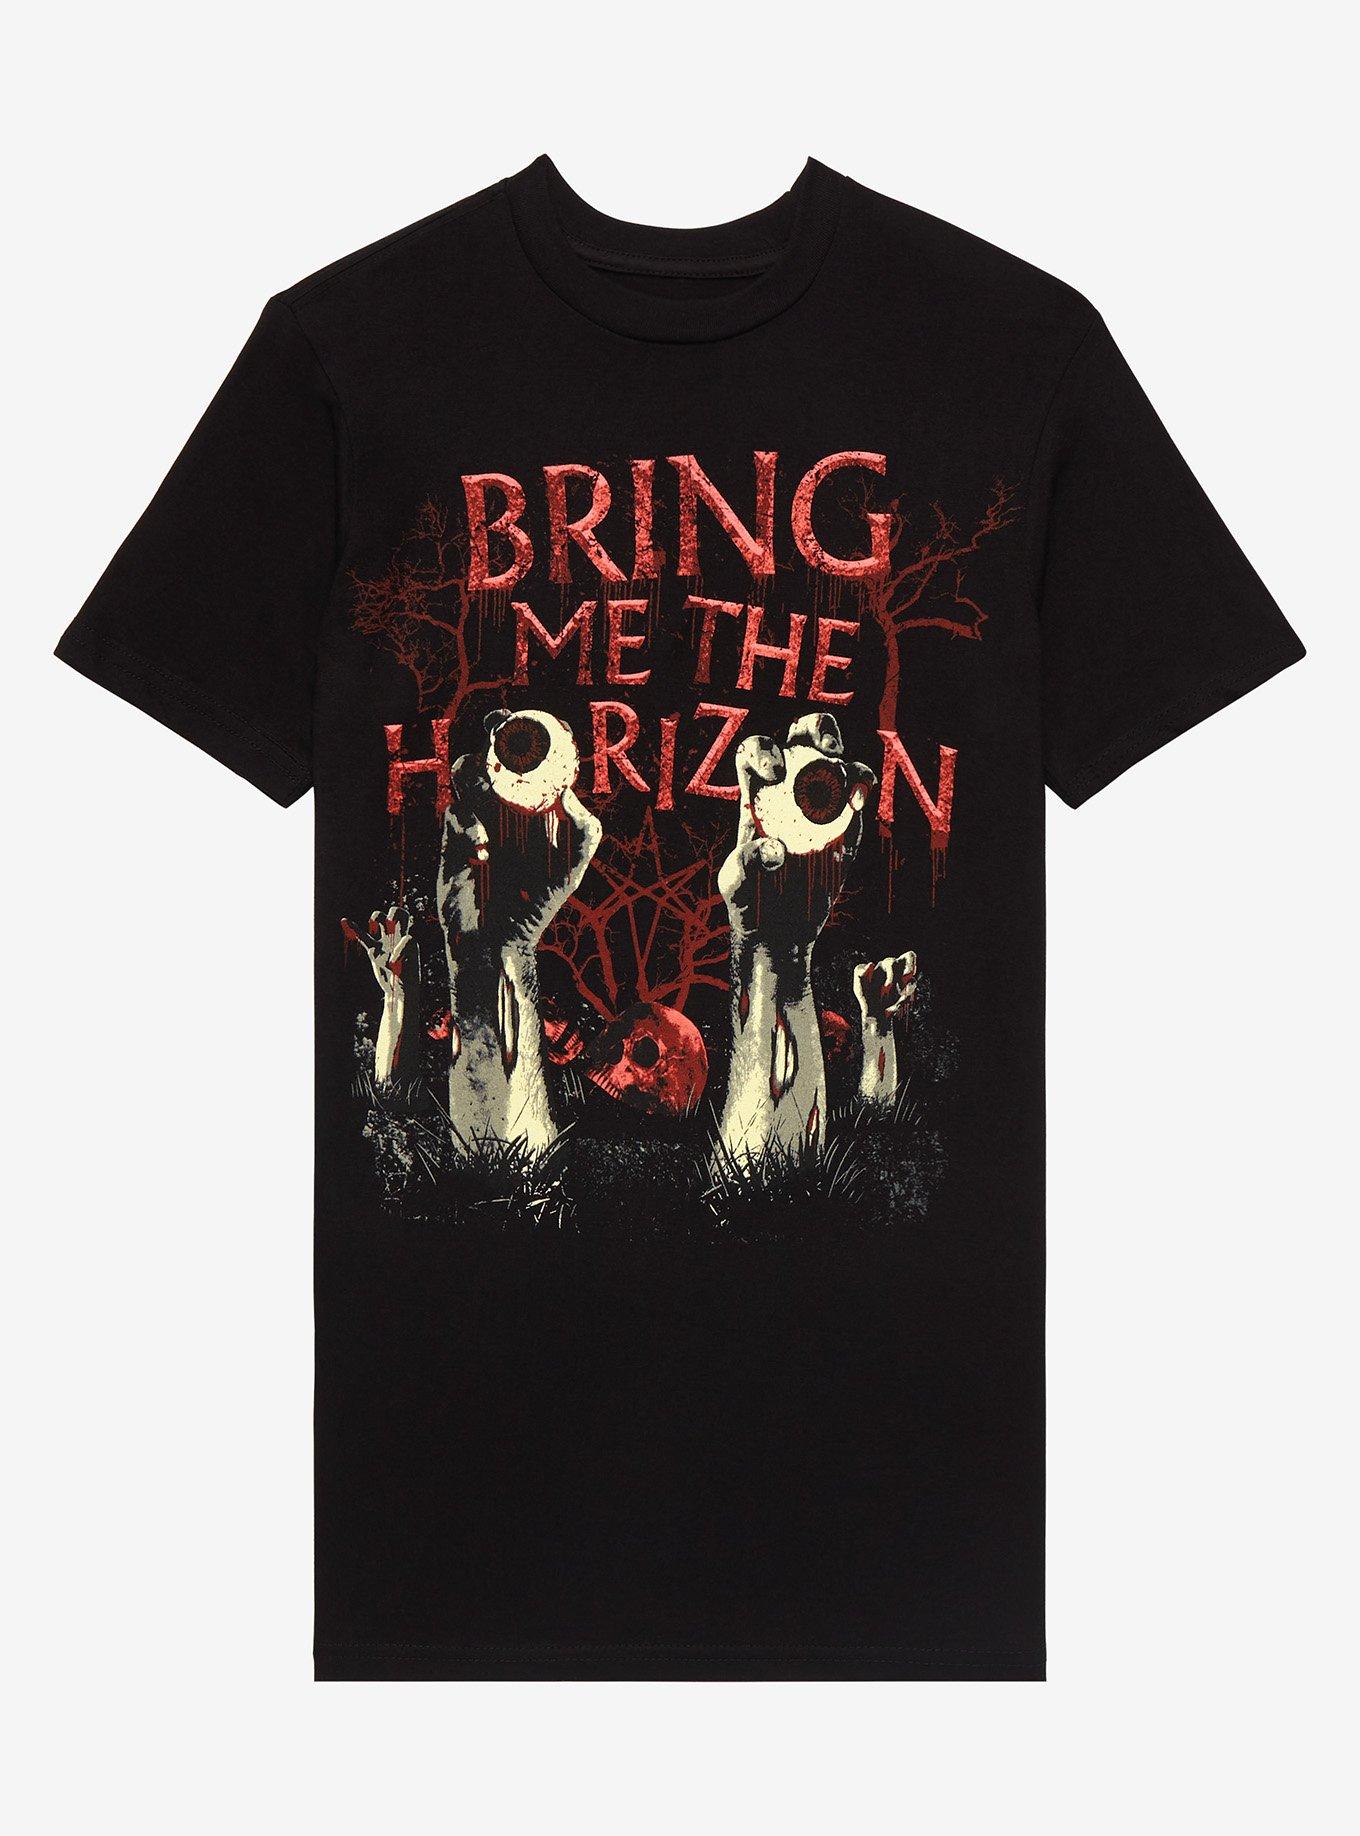 Bring Me The Horizon Tour 2023 Shirt - Ink In Action